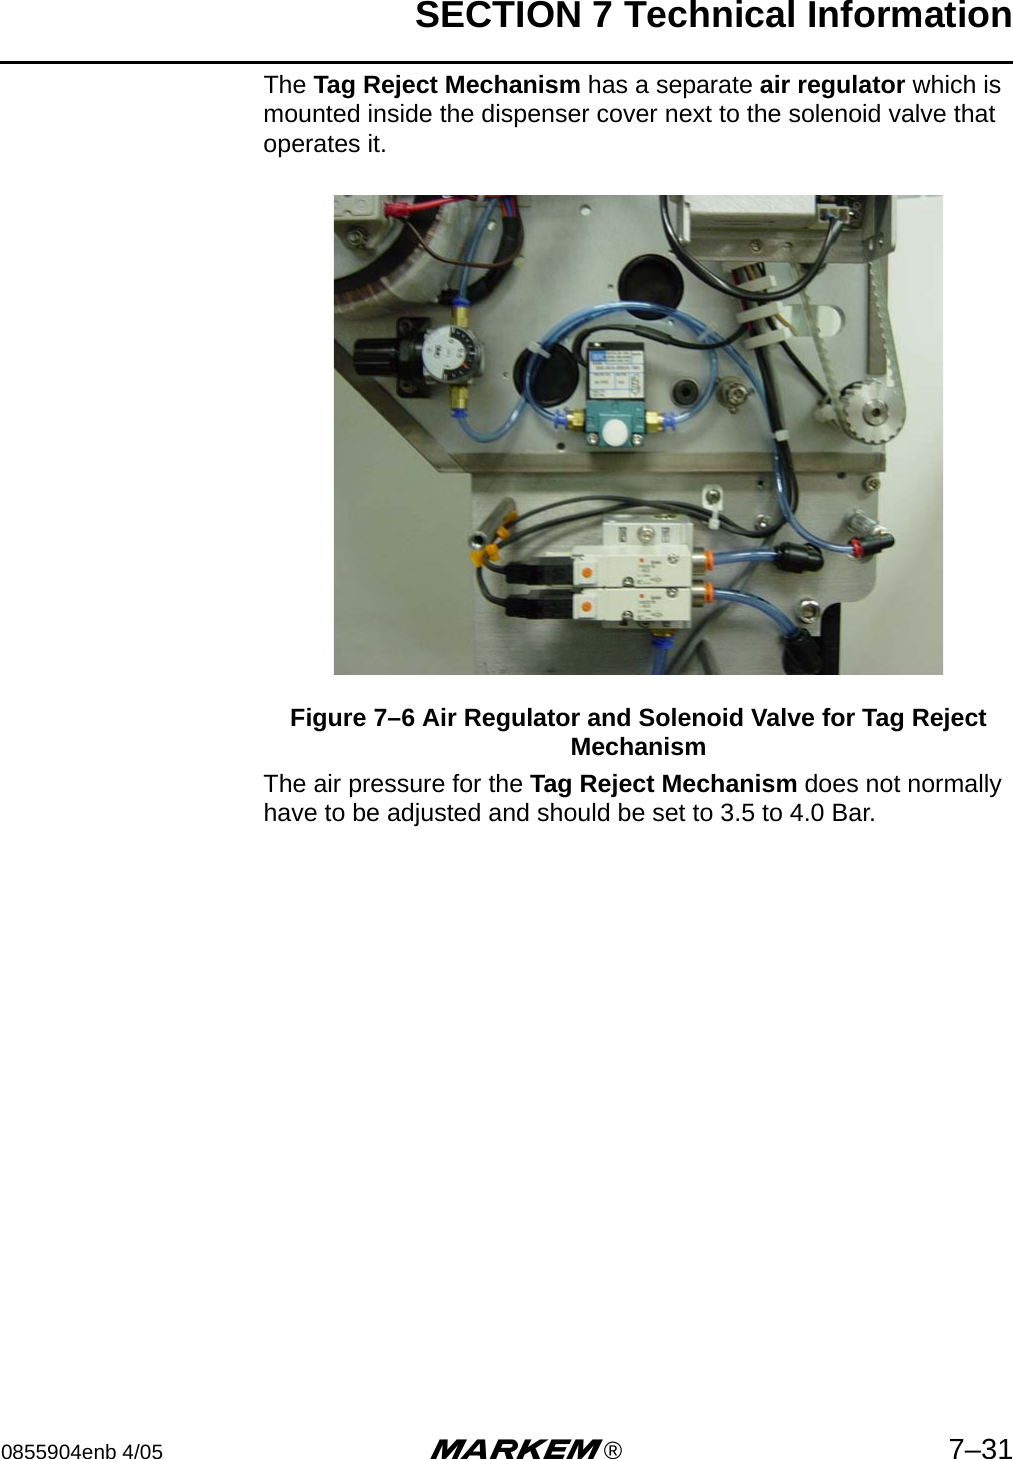 SECTION 7 Technical Information0855904enb 4/05 m®7–31The Tag Reject Mechanism has a separate air regulator which is mounted inside the dispenser cover next to the solenoid valve that operates it.Figure 7–6 Air Regulator and Solenoid Valve for Tag Reject Mechanism The air pressure for the Tag Reject Mechanism does not normally have to be adjusted and should be set to 3.5 to 4.0 Bar.